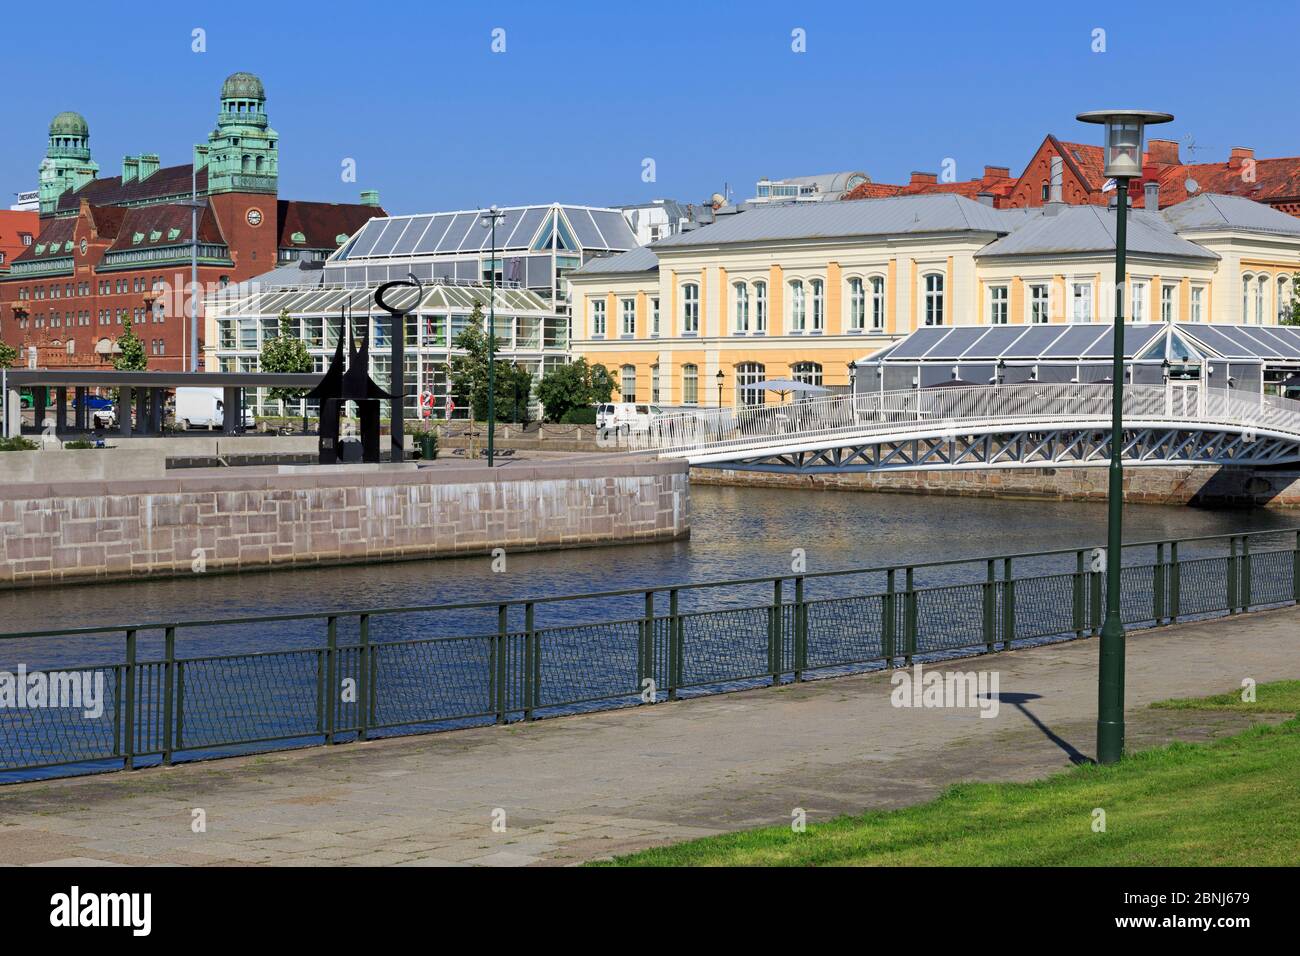 Bagers Plaza and canal, Malmo, Skane County, Sweden, Scandinavia, Europe Stock Photo